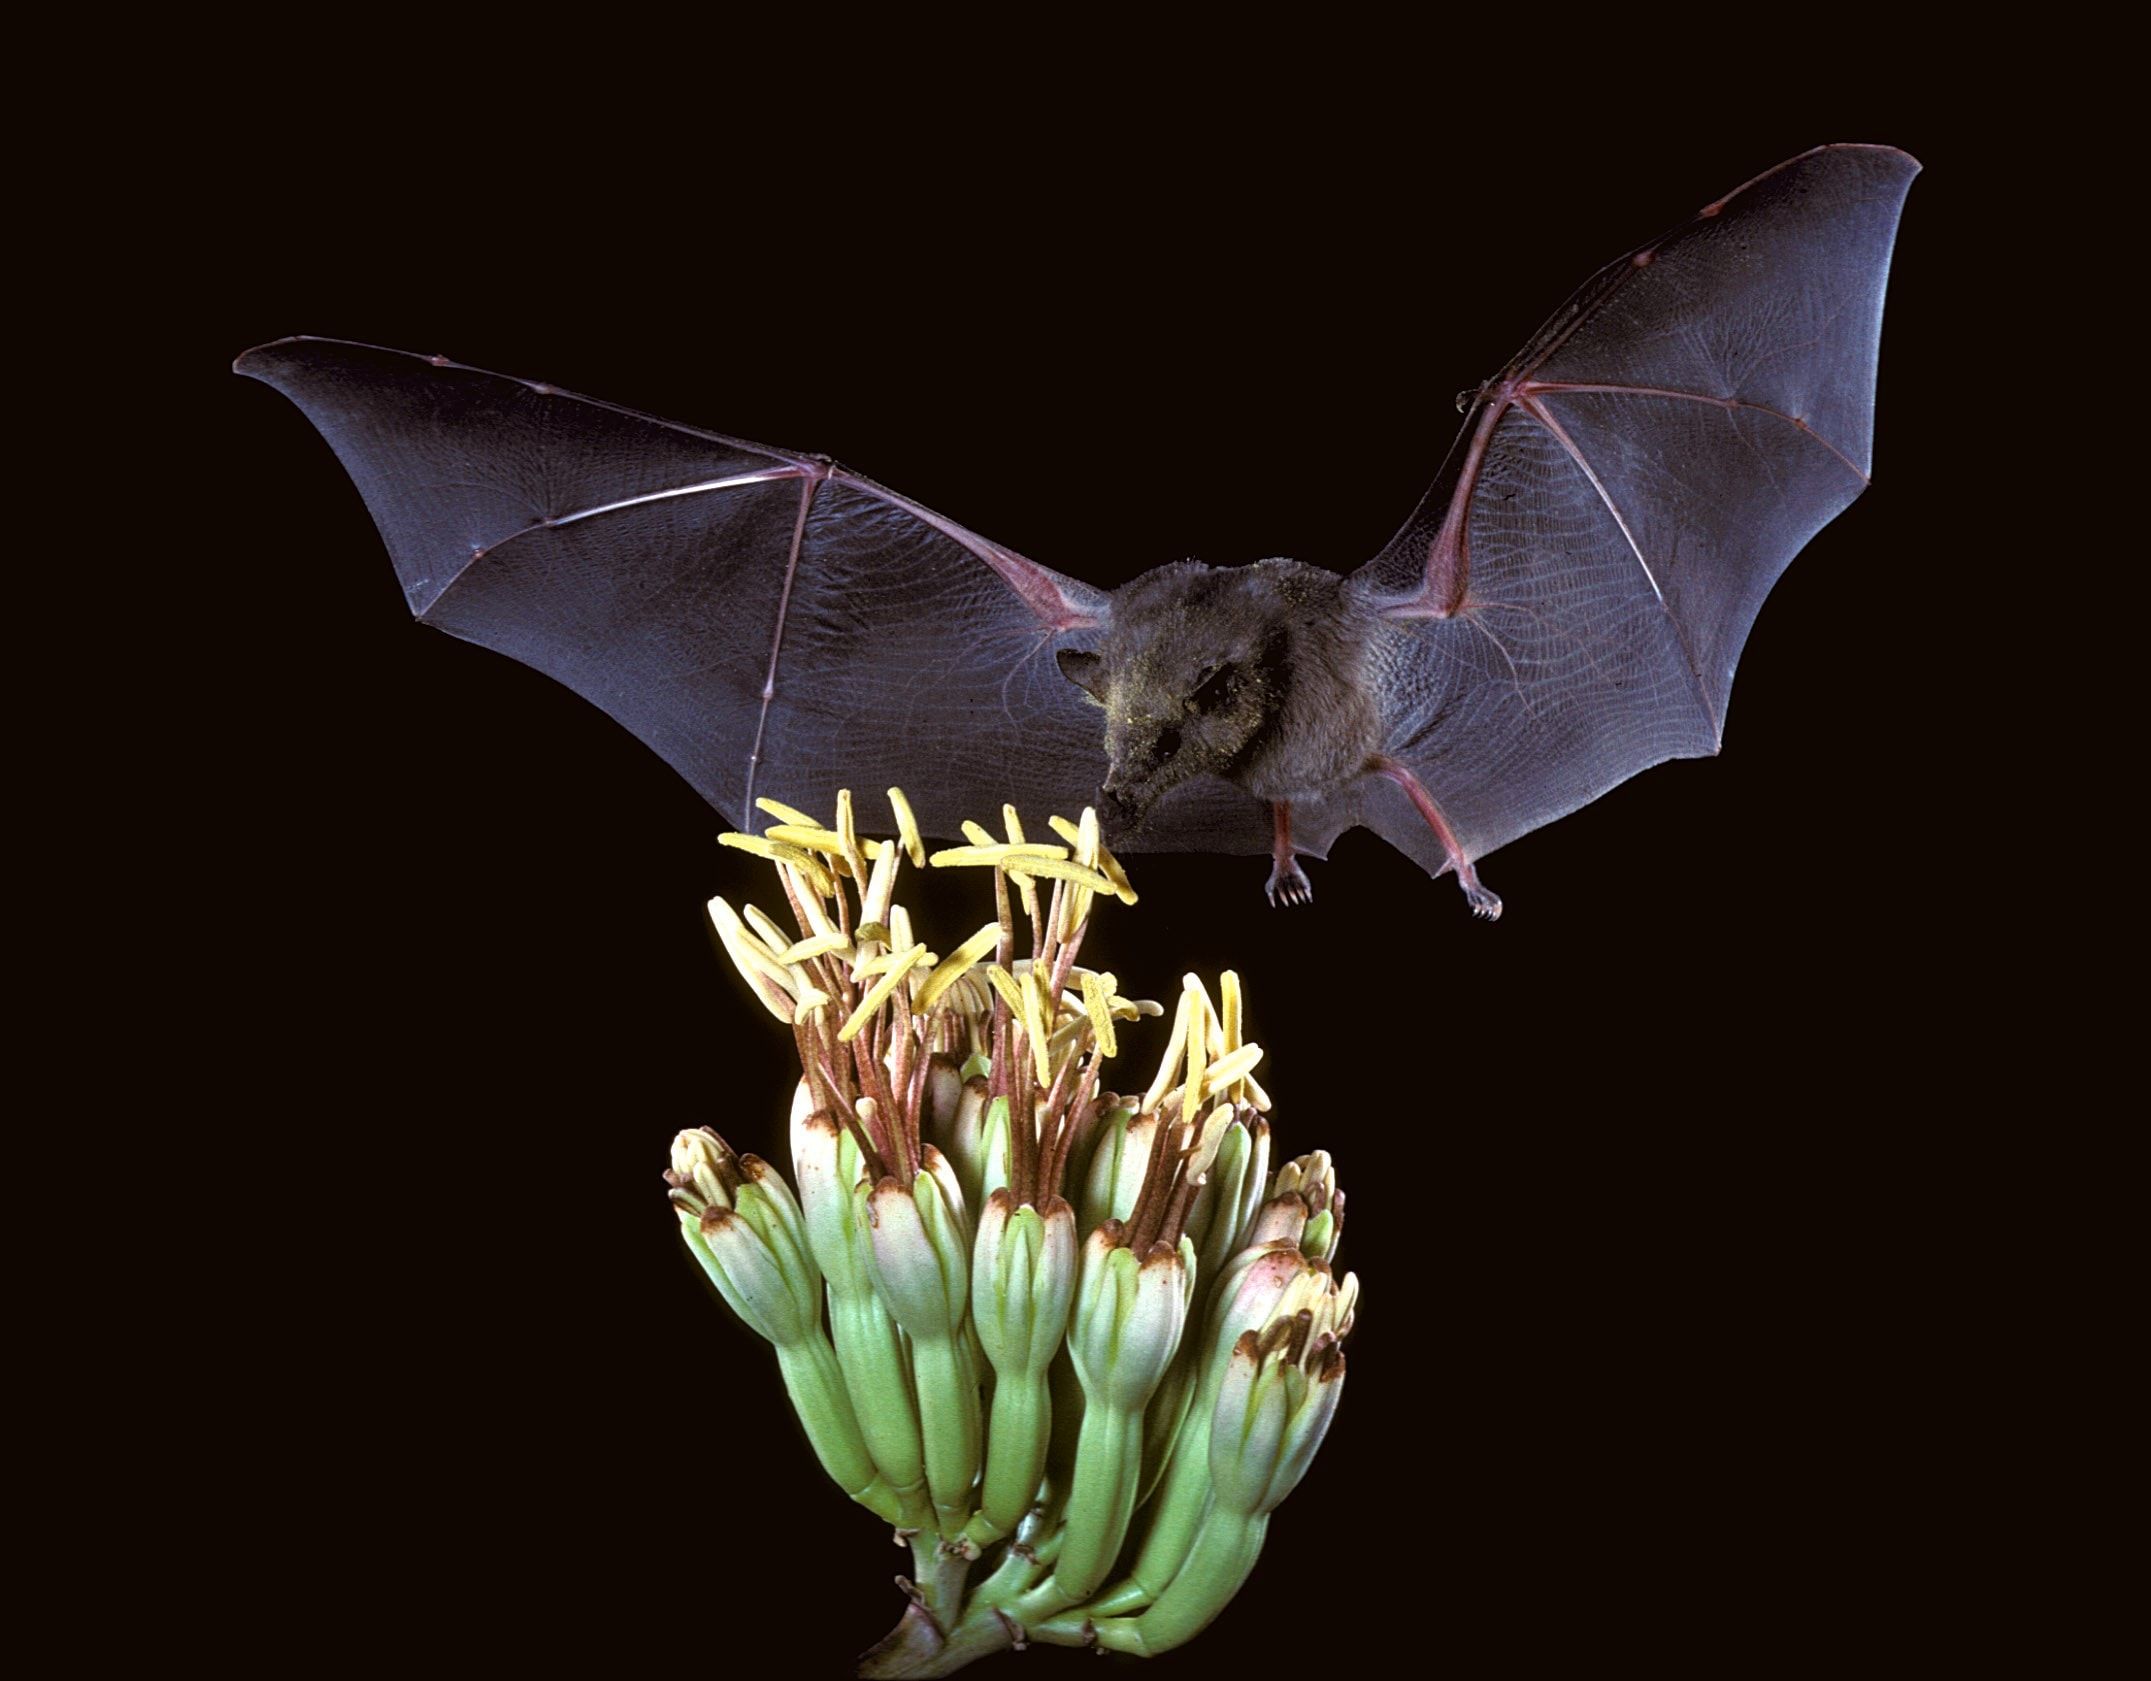 Mexican long tongued bat sipping nectar on flower.